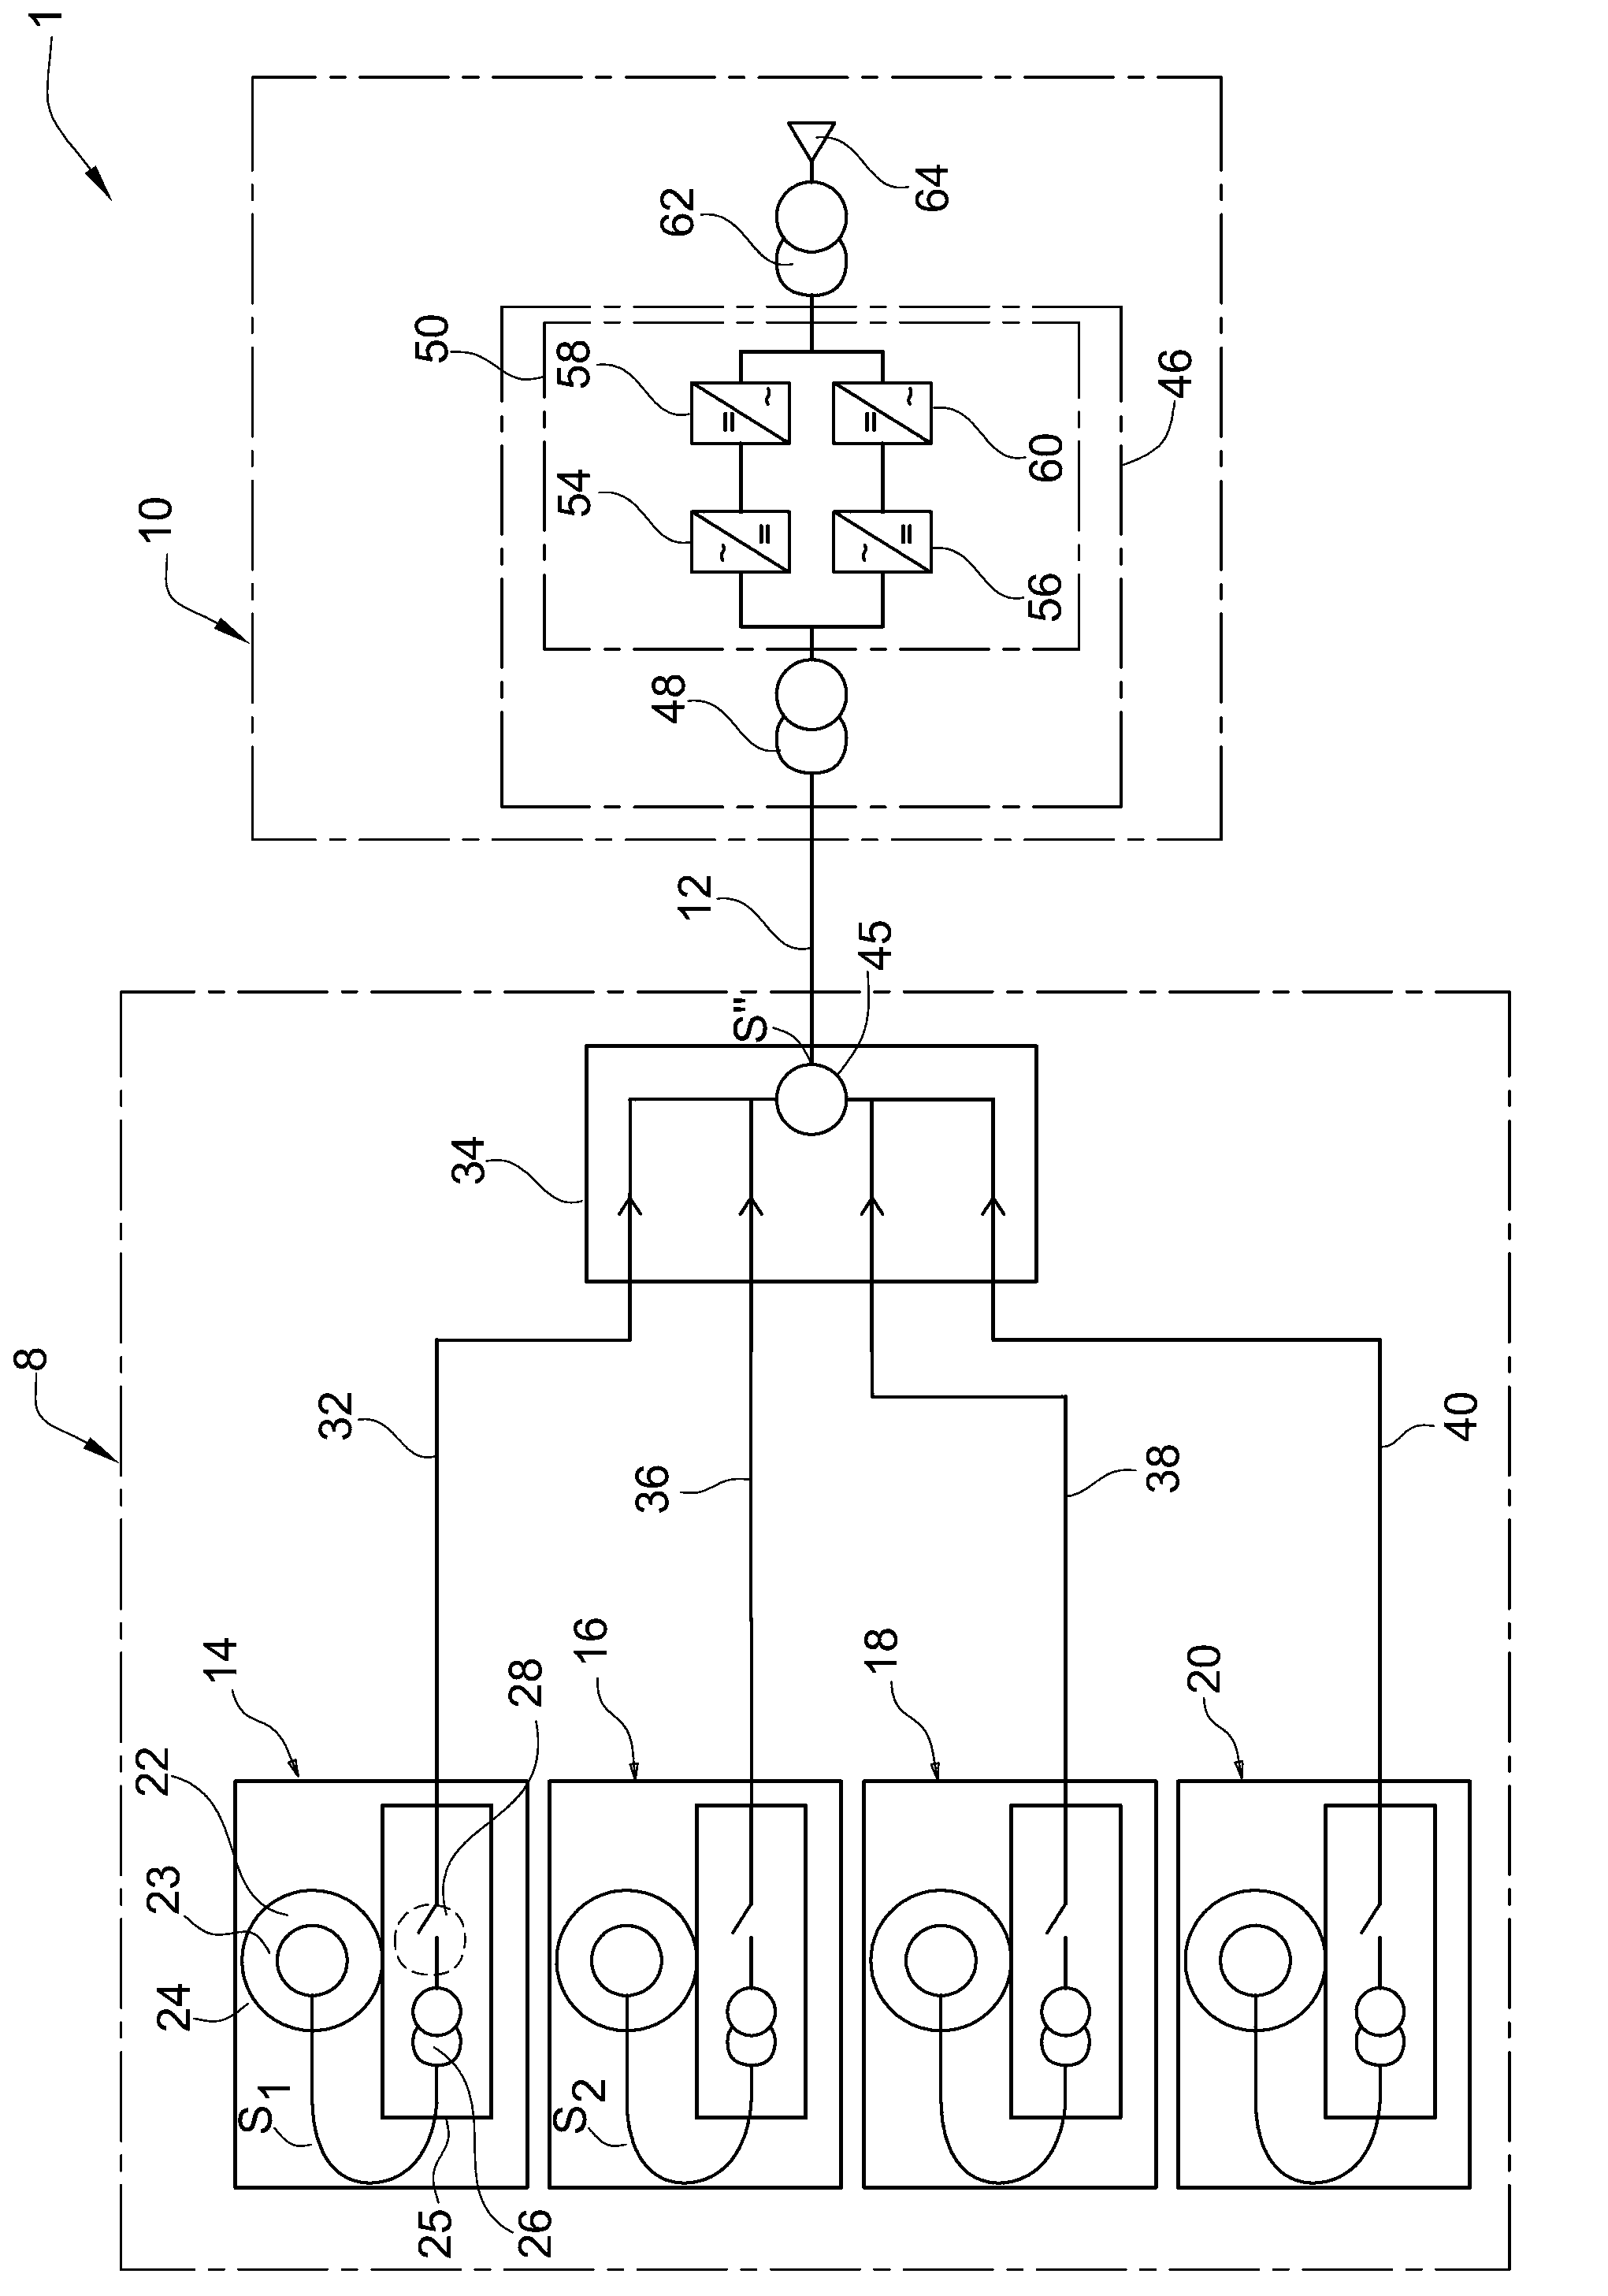 Facility for producing electricity comprising a plurality of electrical production devices capable of transforming mechanical energy into electrical energy